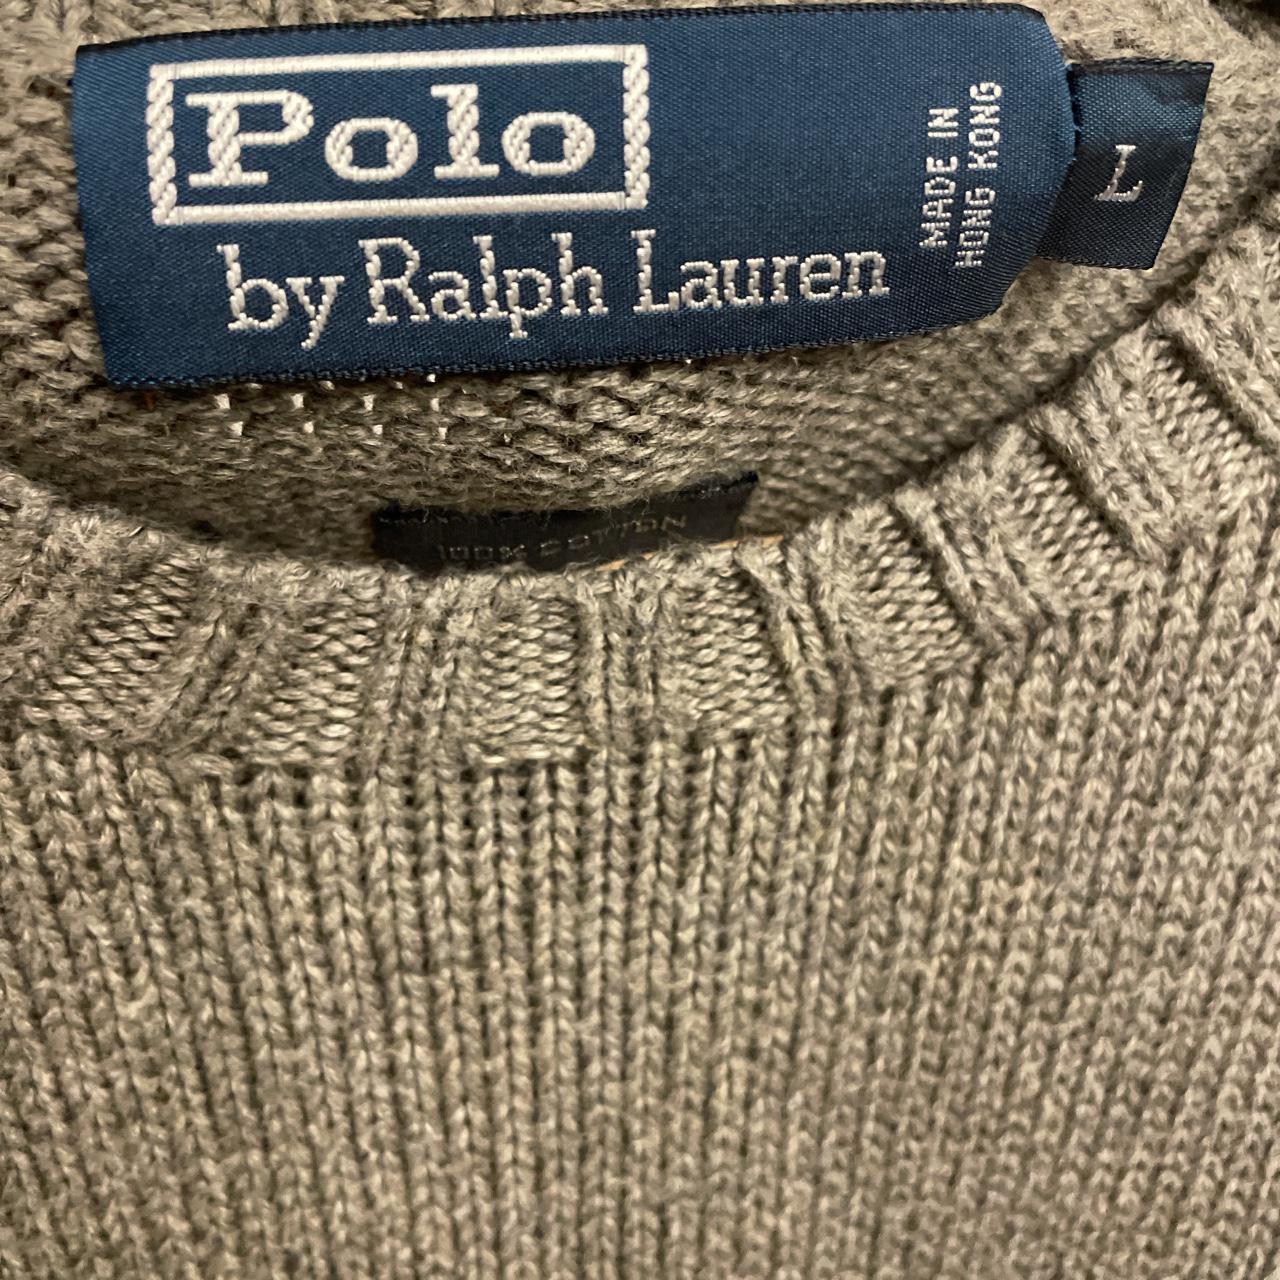 Product Image 3 - Vintage Polo By Ralph Lauren